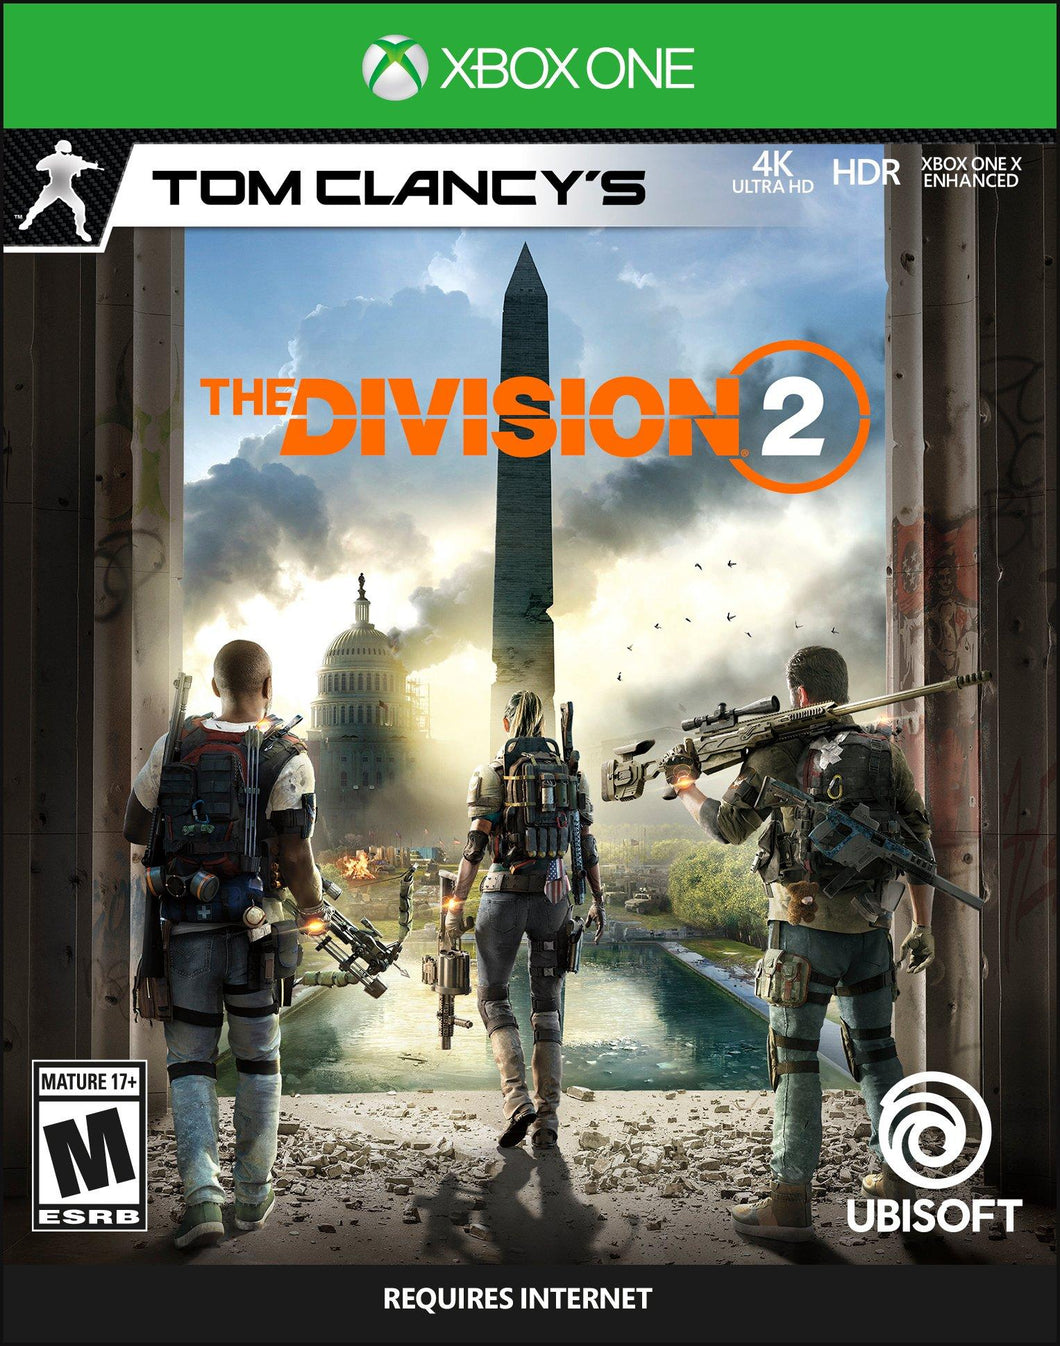 The Division 2 XBONE